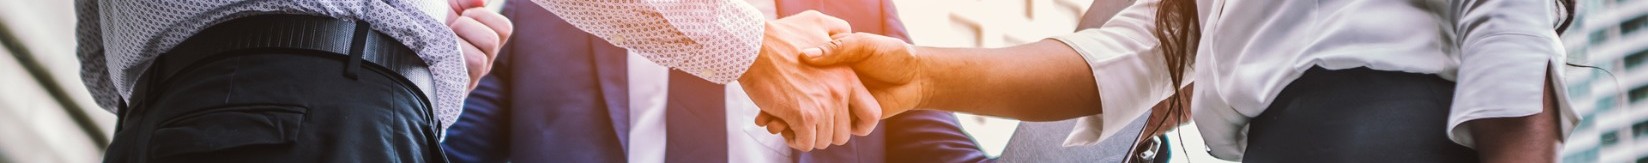 Handshake of business people in a city setting.